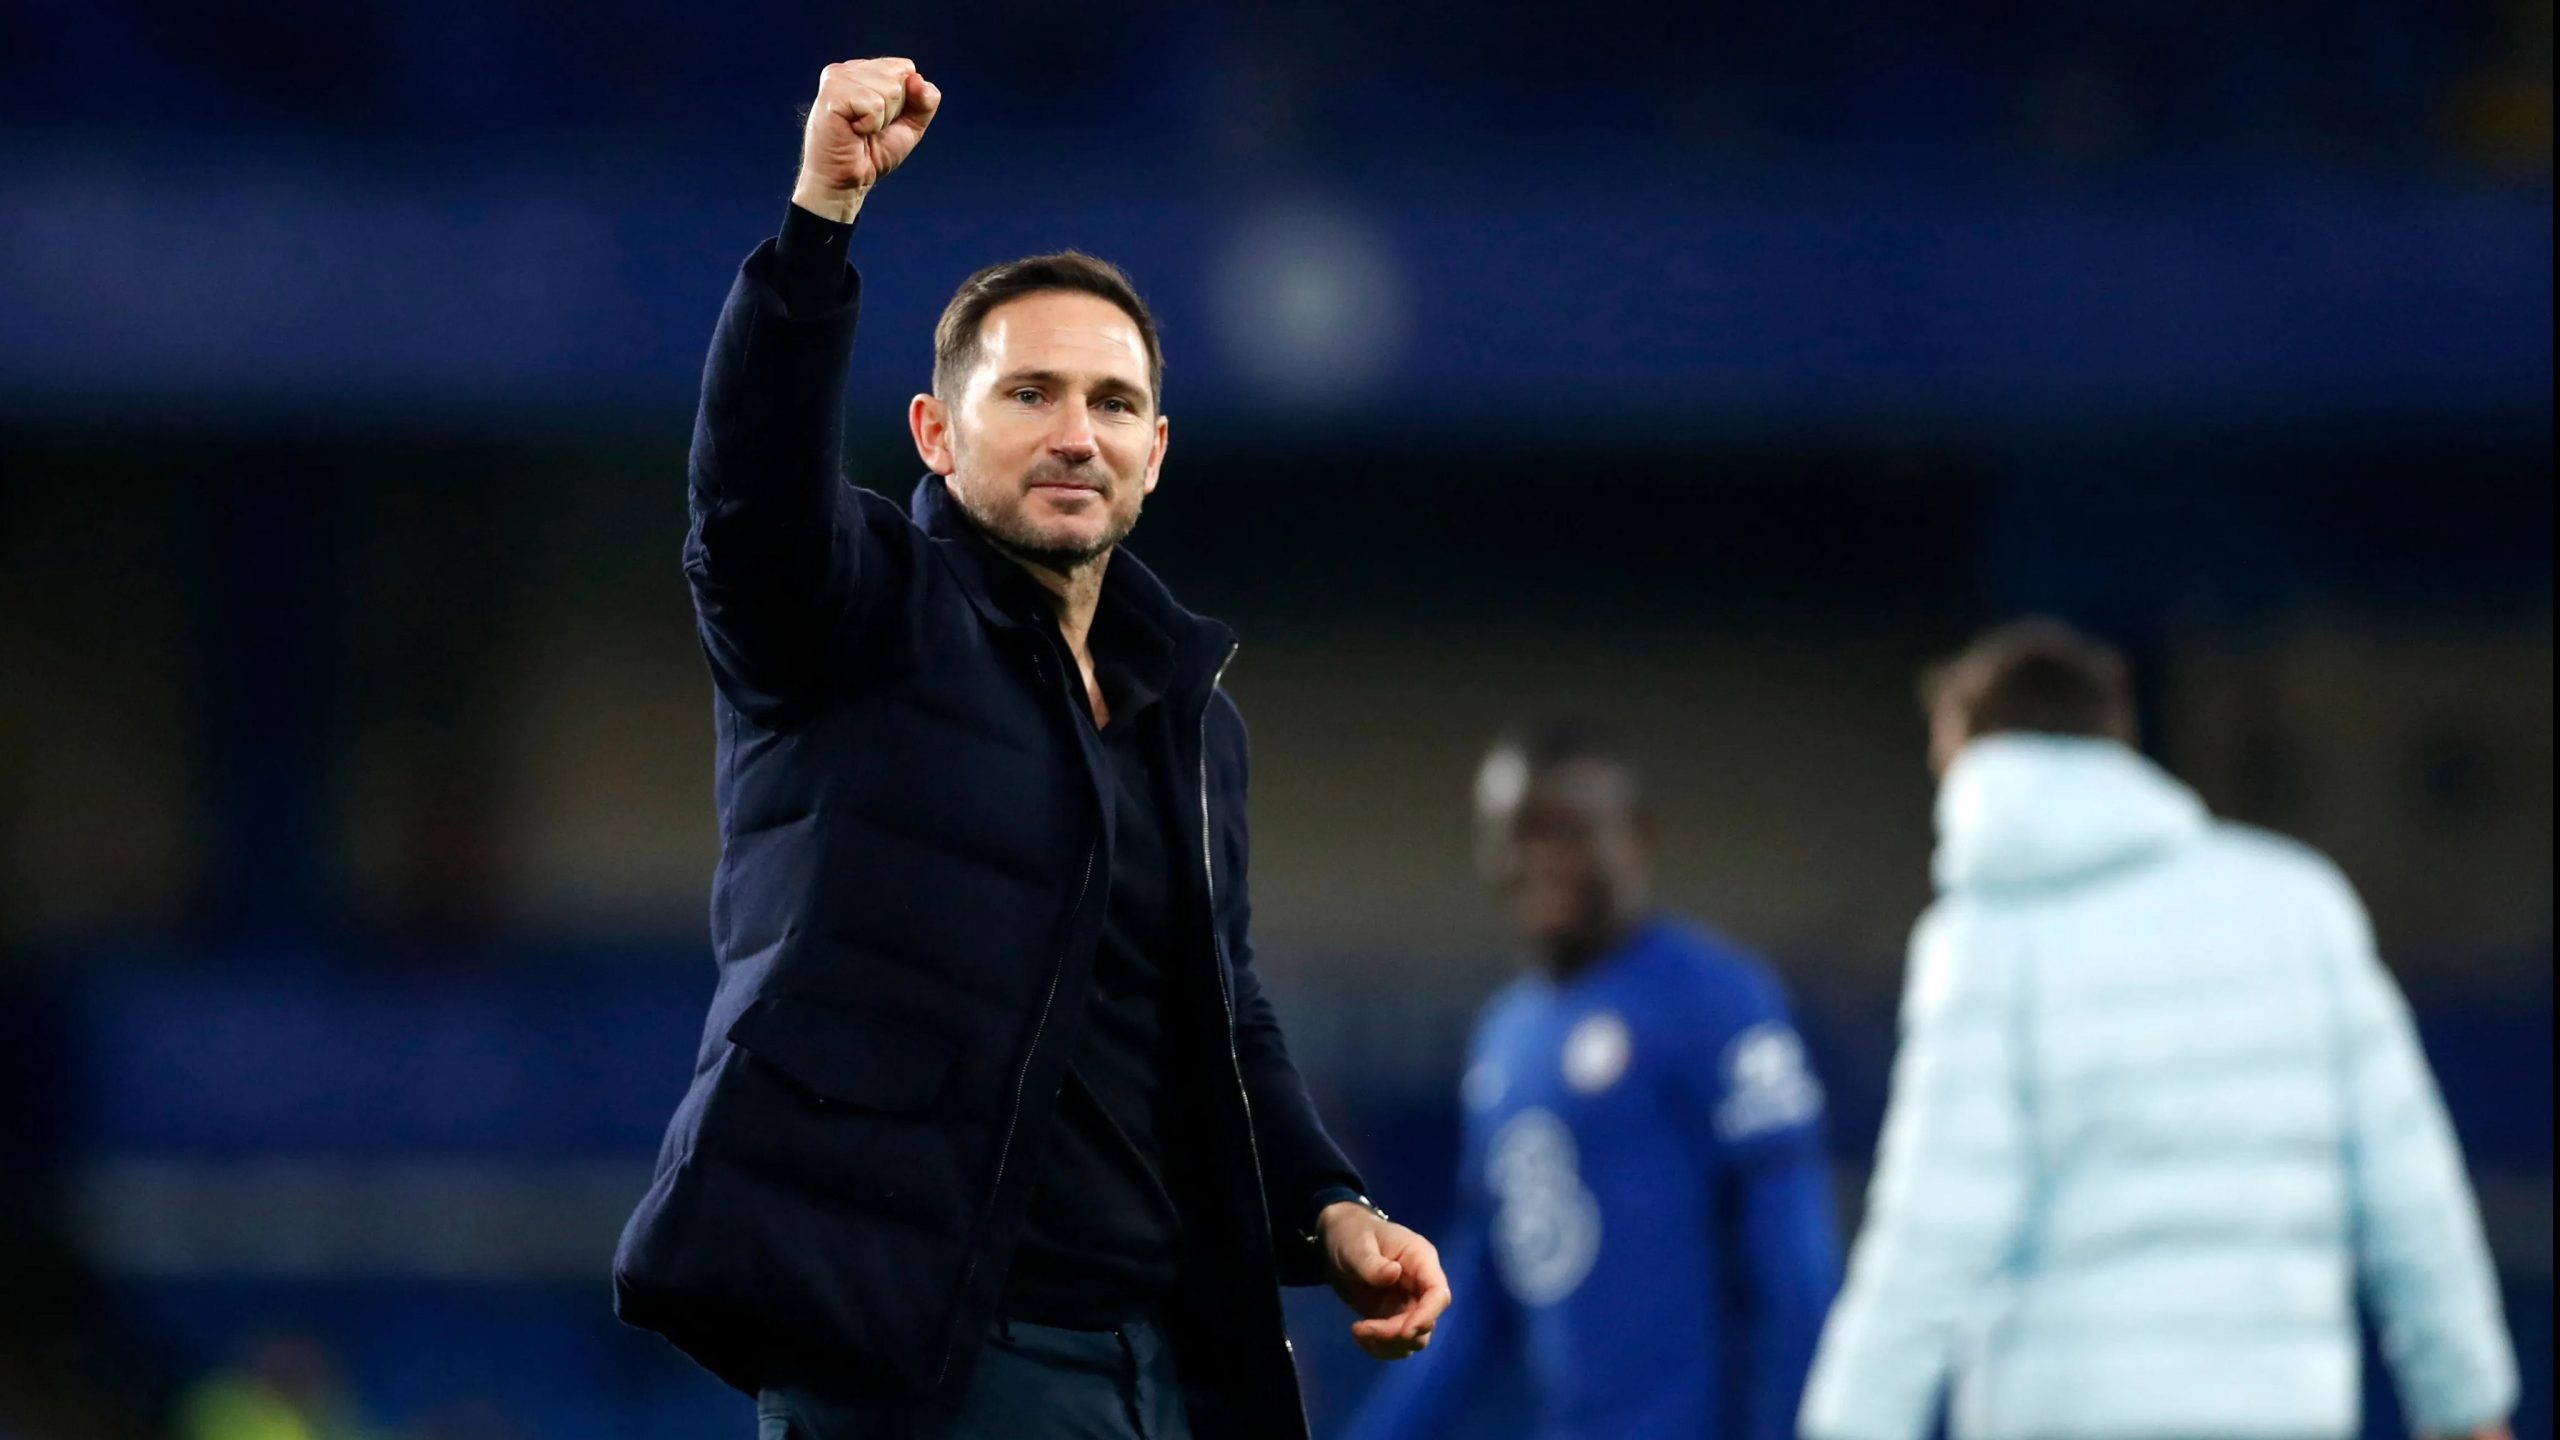 ‘Consistency is our challenge,’ says Frank Lampard as Chelsea overcome Leeds test